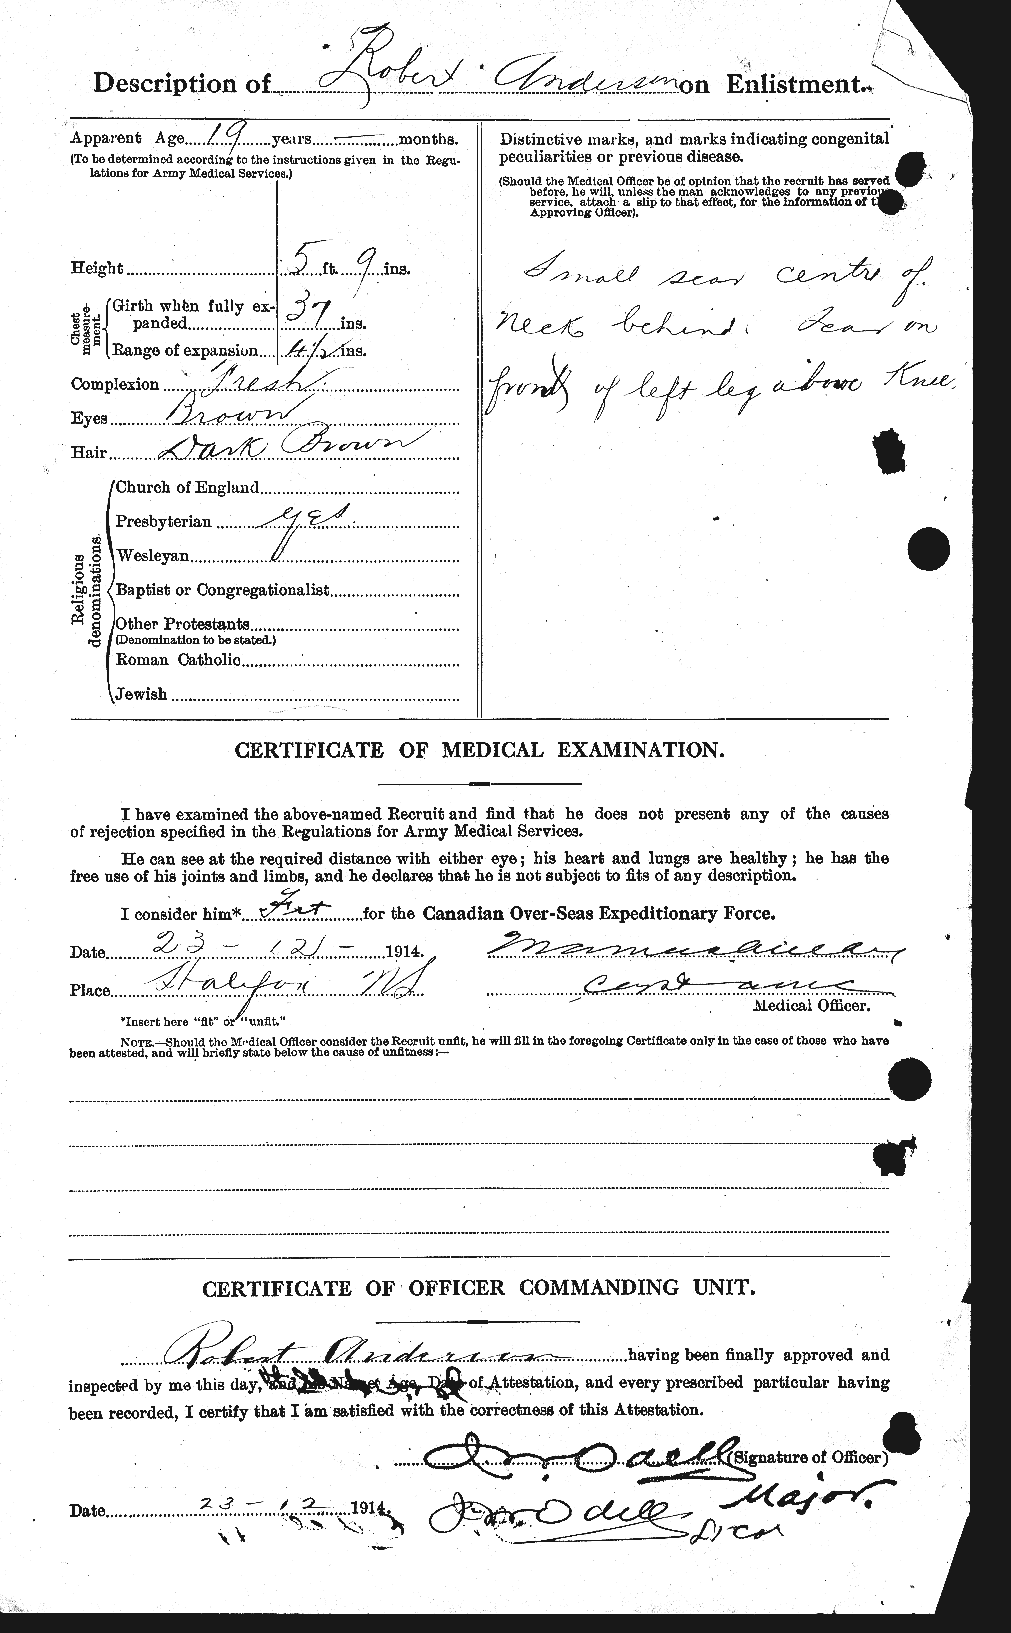 Personnel Records of the First World War - CEF 207292b